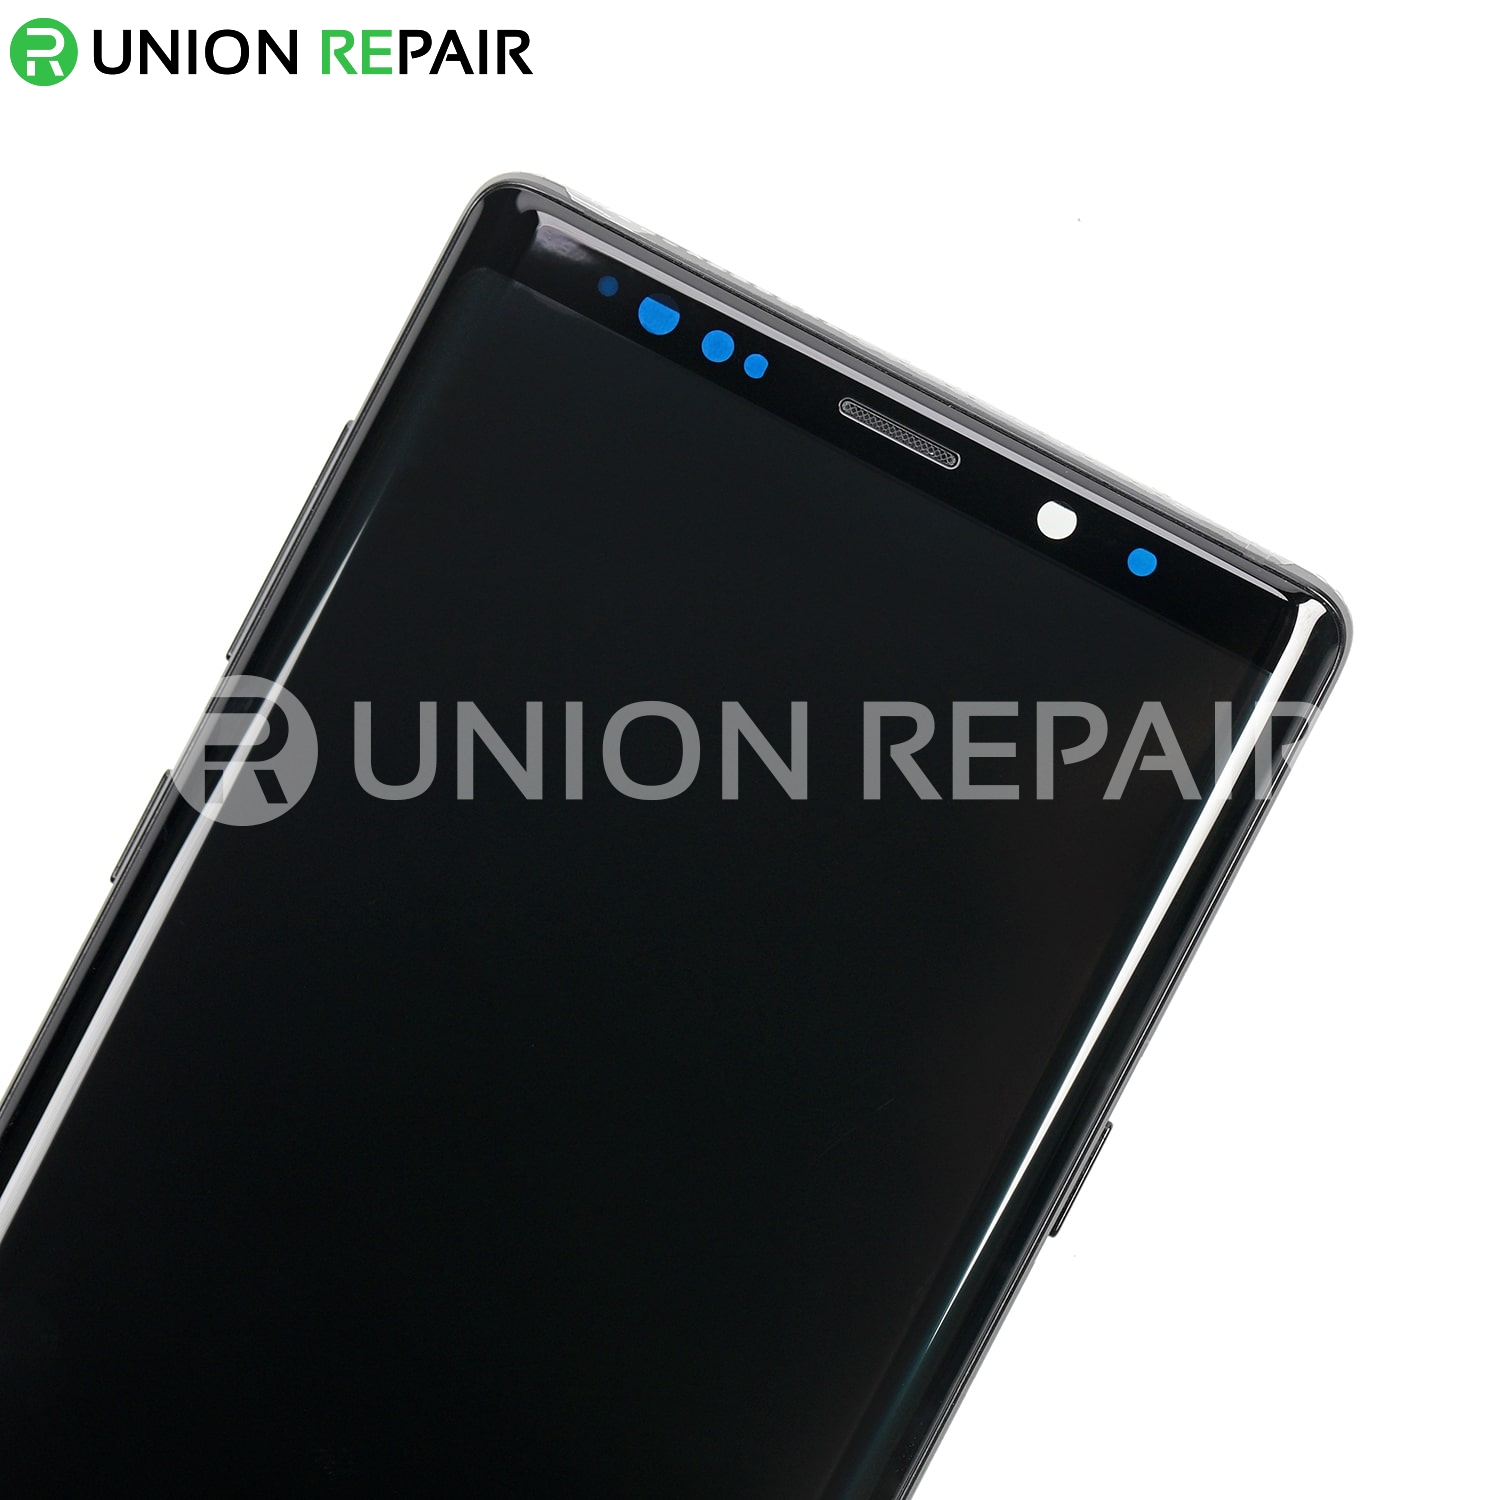 Replacement for Samsung Galaxy Note 9 LCD Screen Digitizer Assembly with Frame - Black